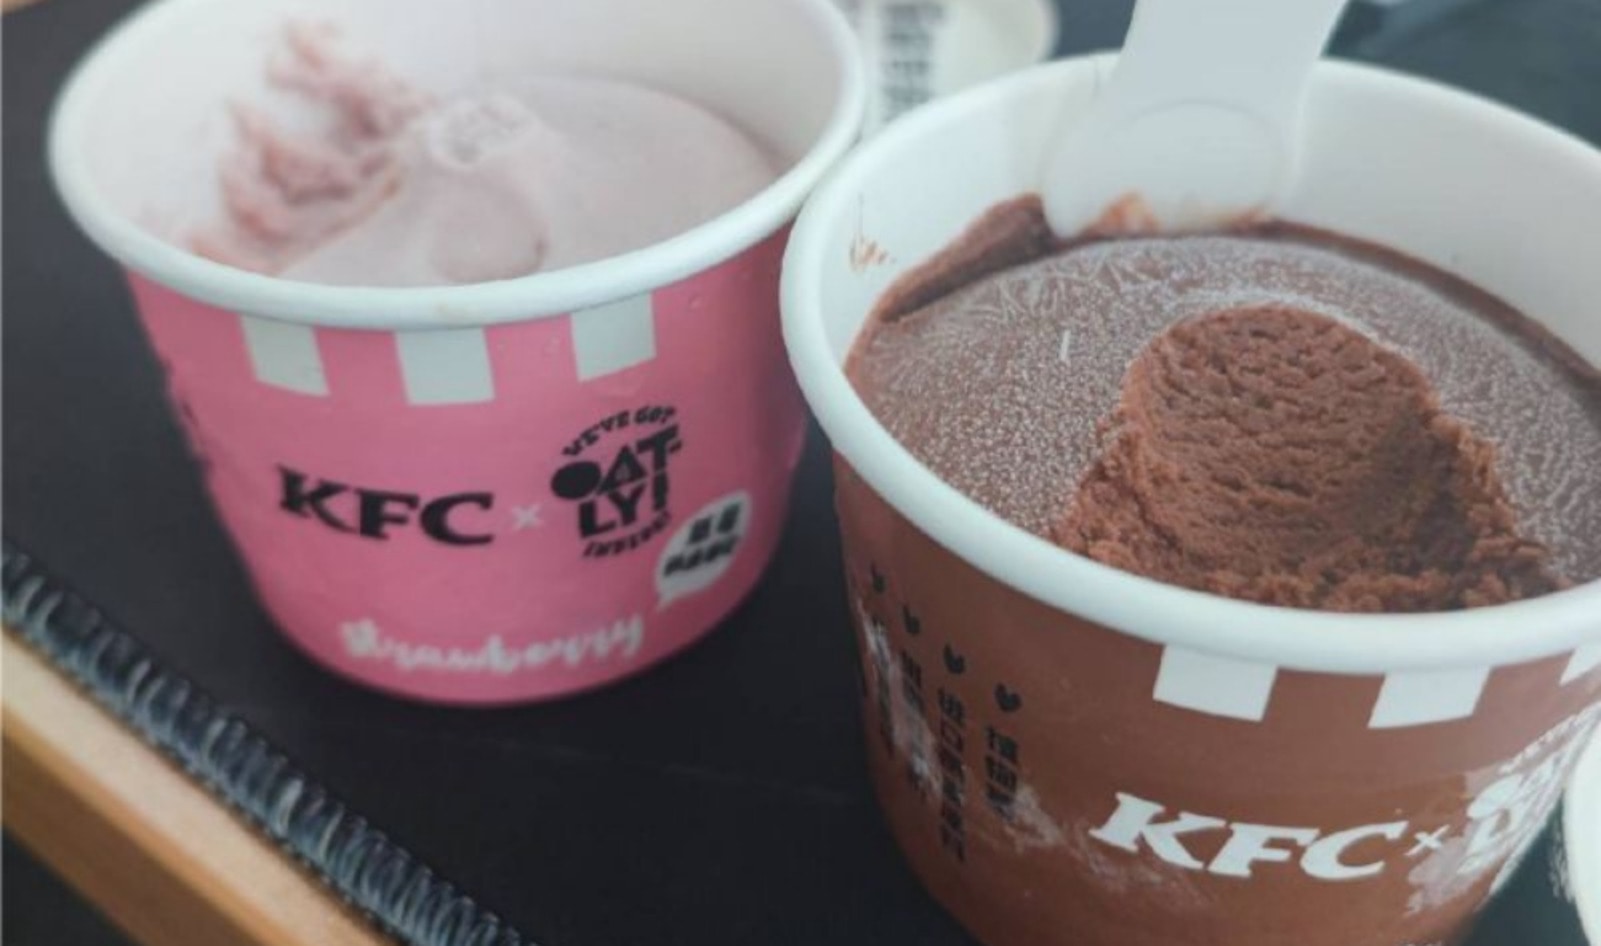 KFC Just Launched Oatly Vegan Ice Cream in China